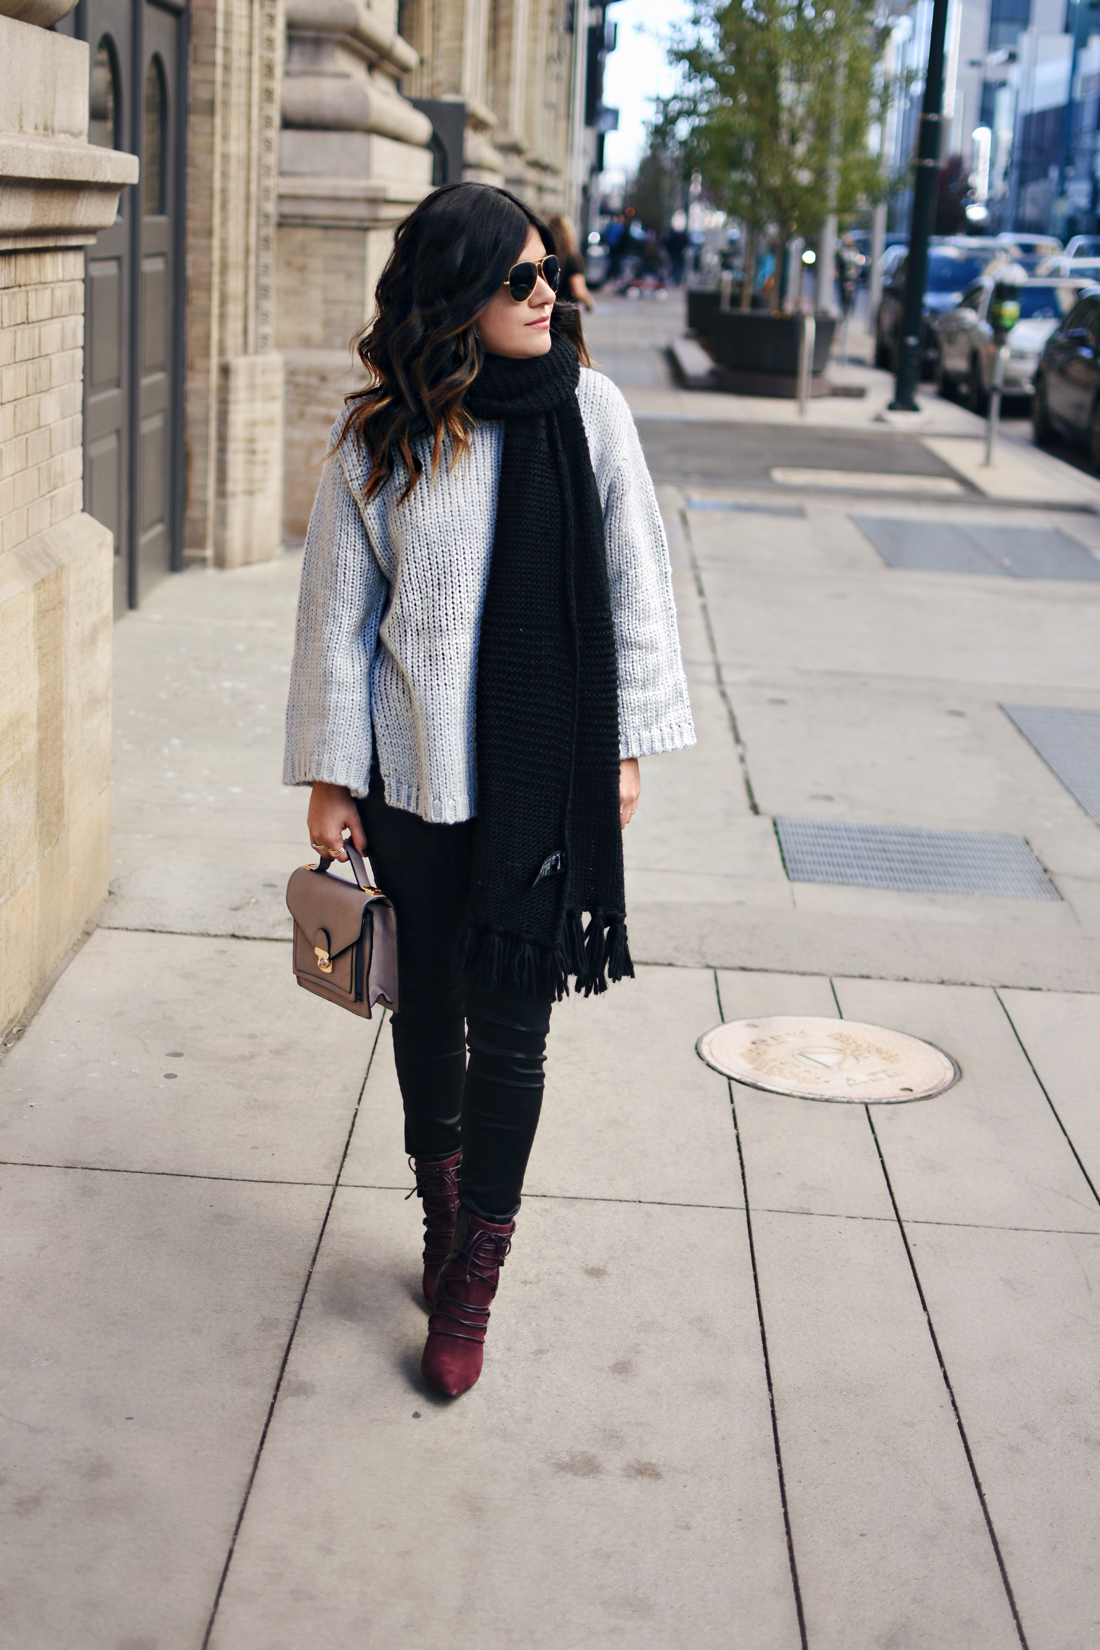 Carolina Hellal of Chic Talk wearing a Chicwish  knit sweater, Madewell coated jeans, Nine West lace up booties and Rayban aviator sunglasses